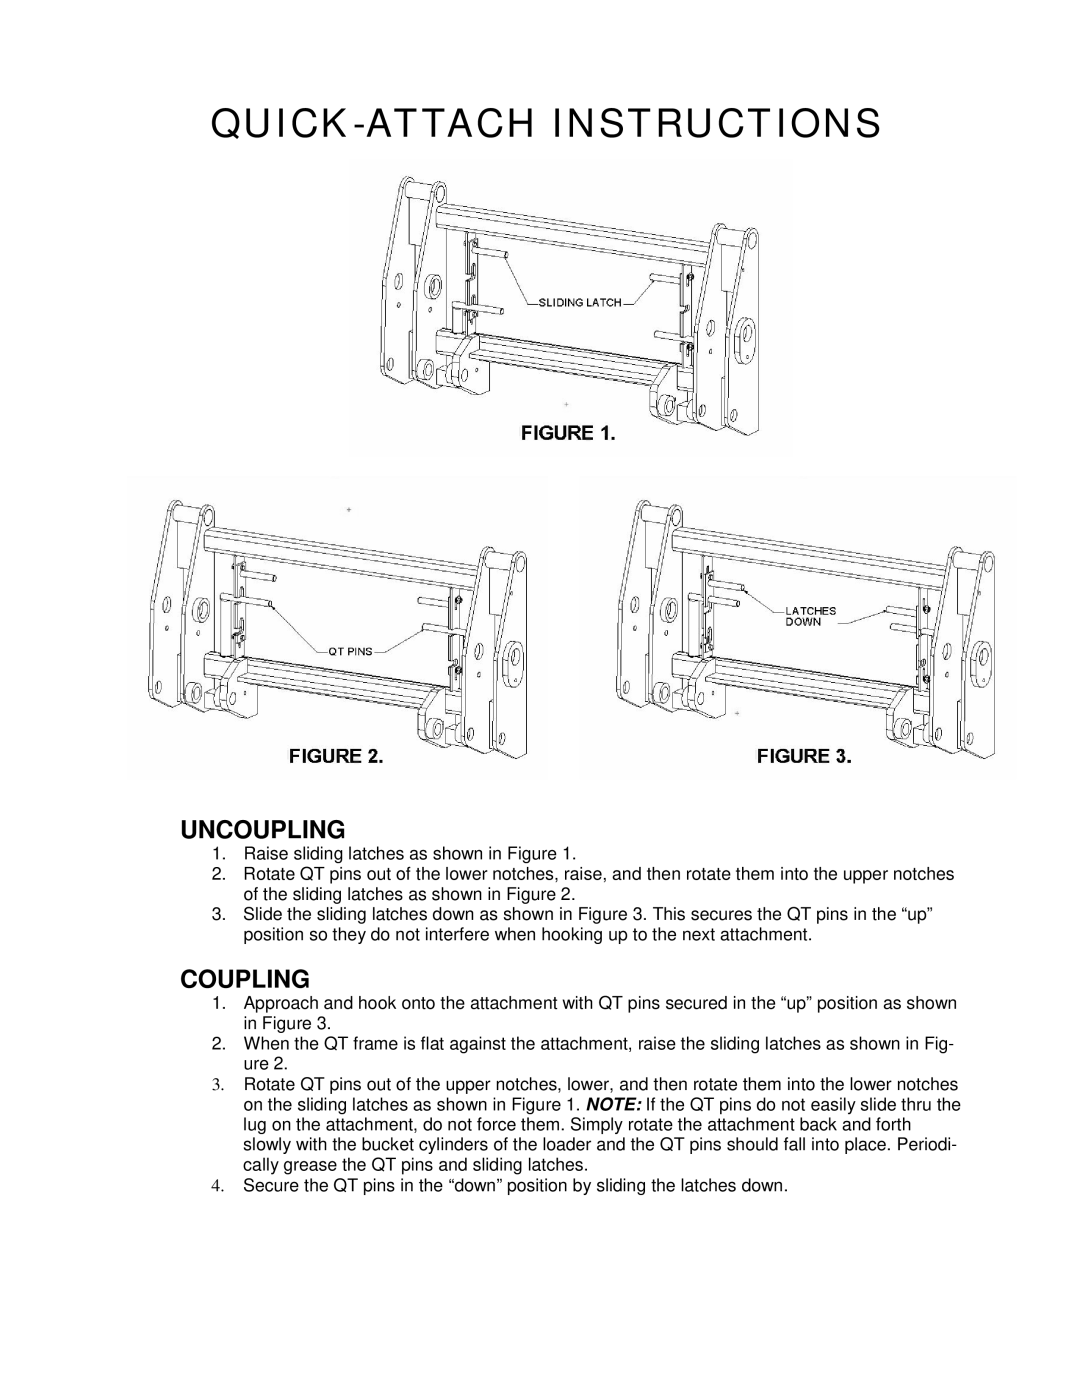 MK Sound GP25 owner manual Quick-Attach Instructions, Uncoupling, Coupling 